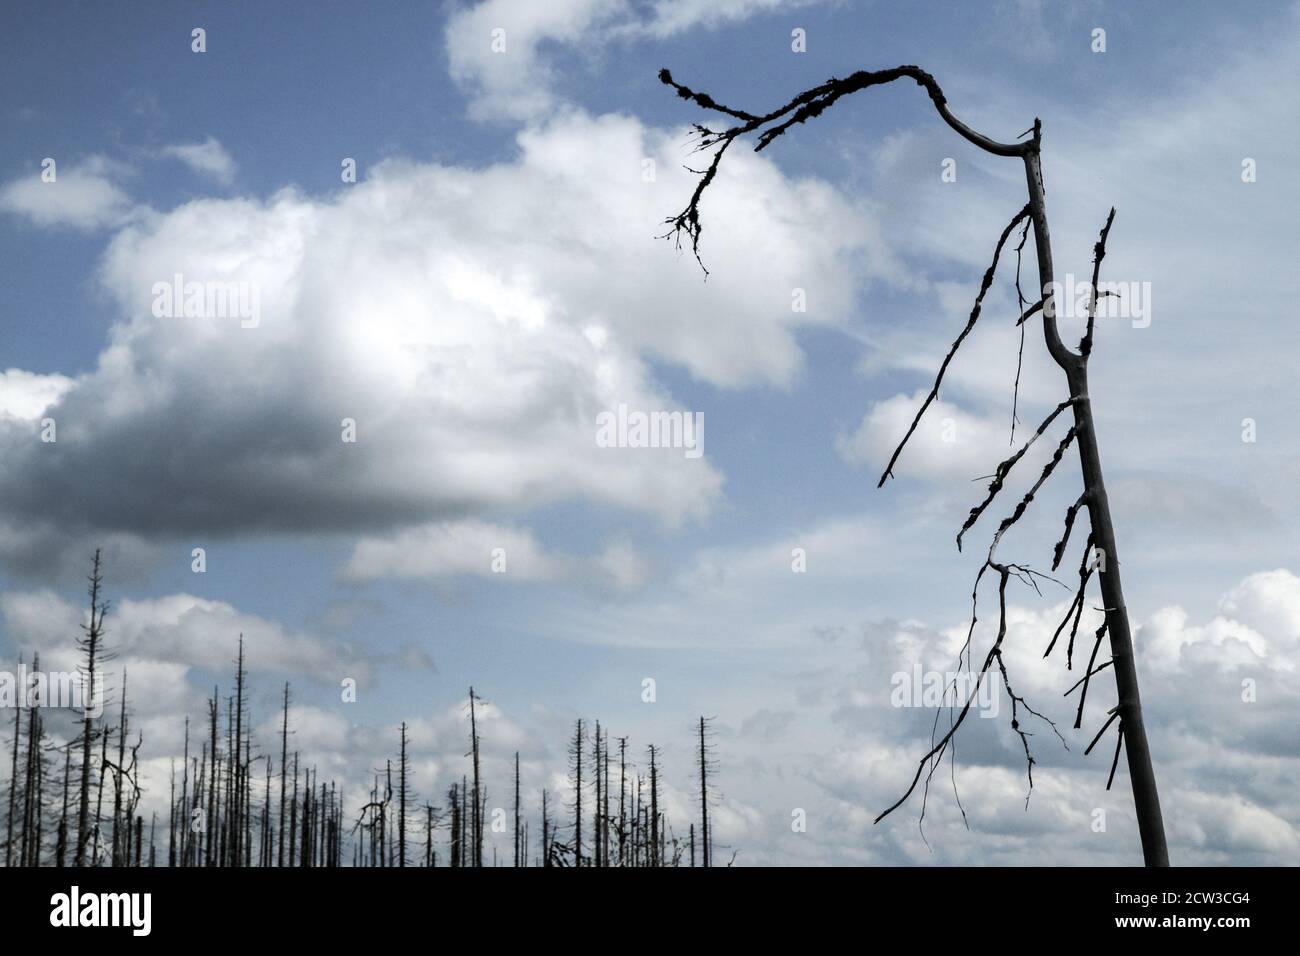 The forest damaged by the hurricane and left to revitalize naturally without intervention of the human. Stock Photo